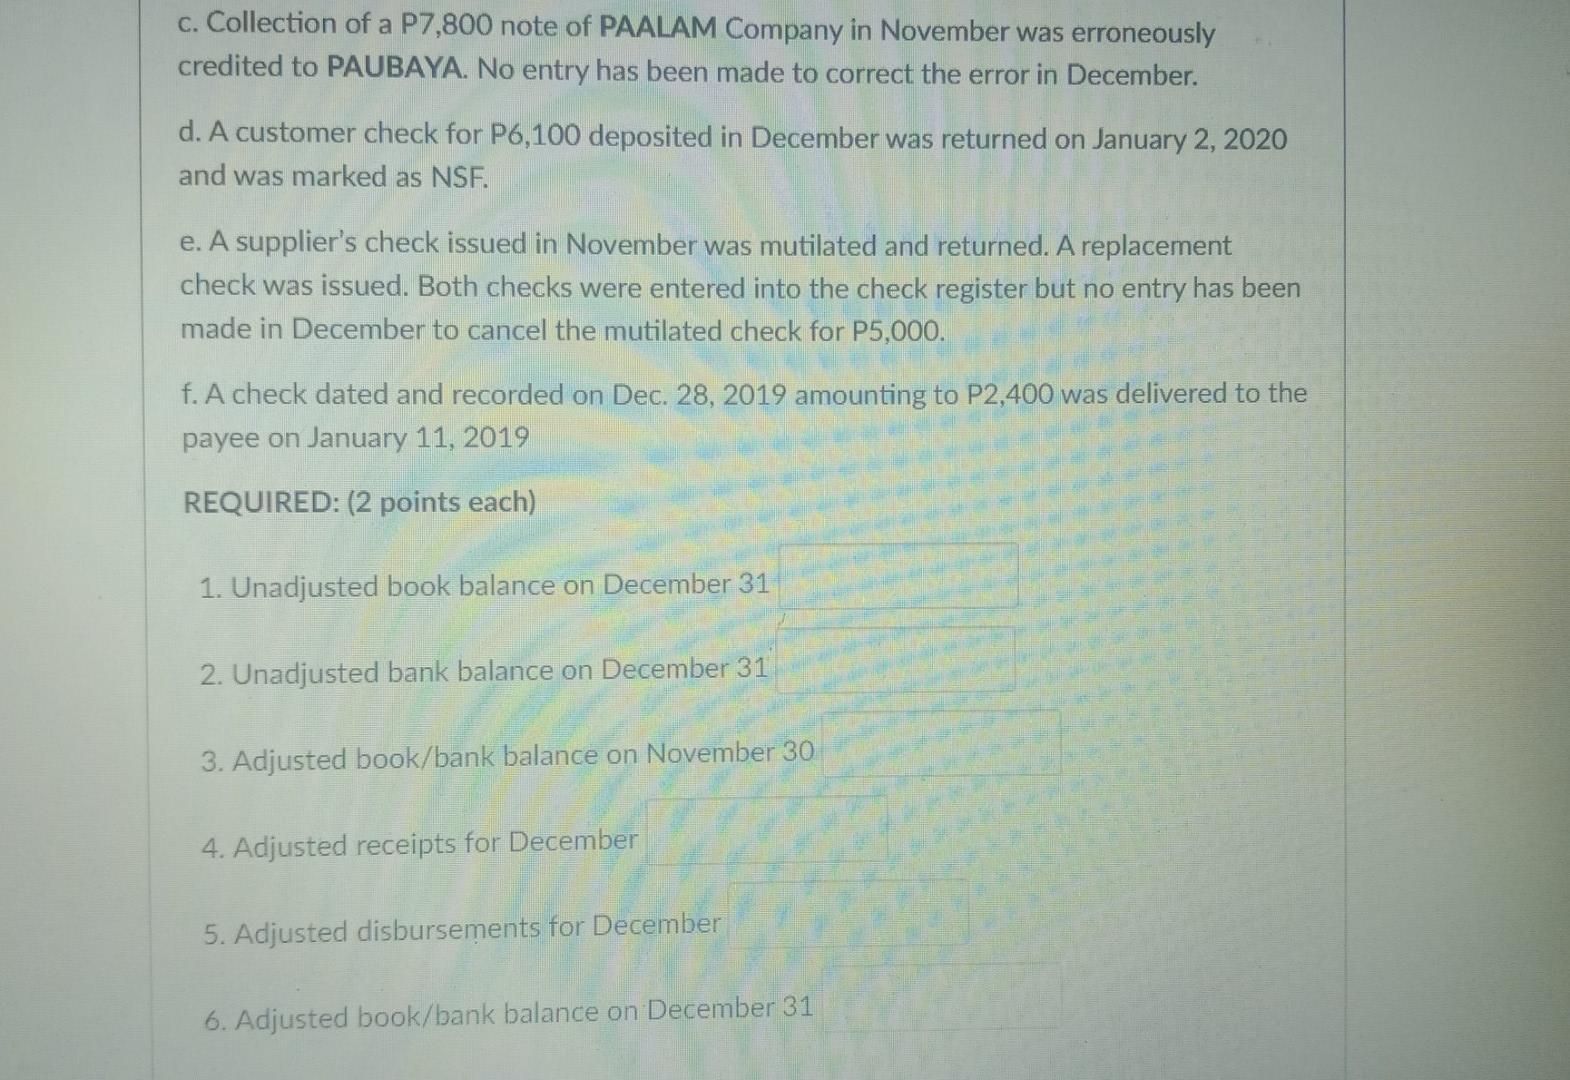 c. Collection of a P7,800 note of PAALAM Company in November was erroneously credited to PAUBAYA. No entry has been made to c